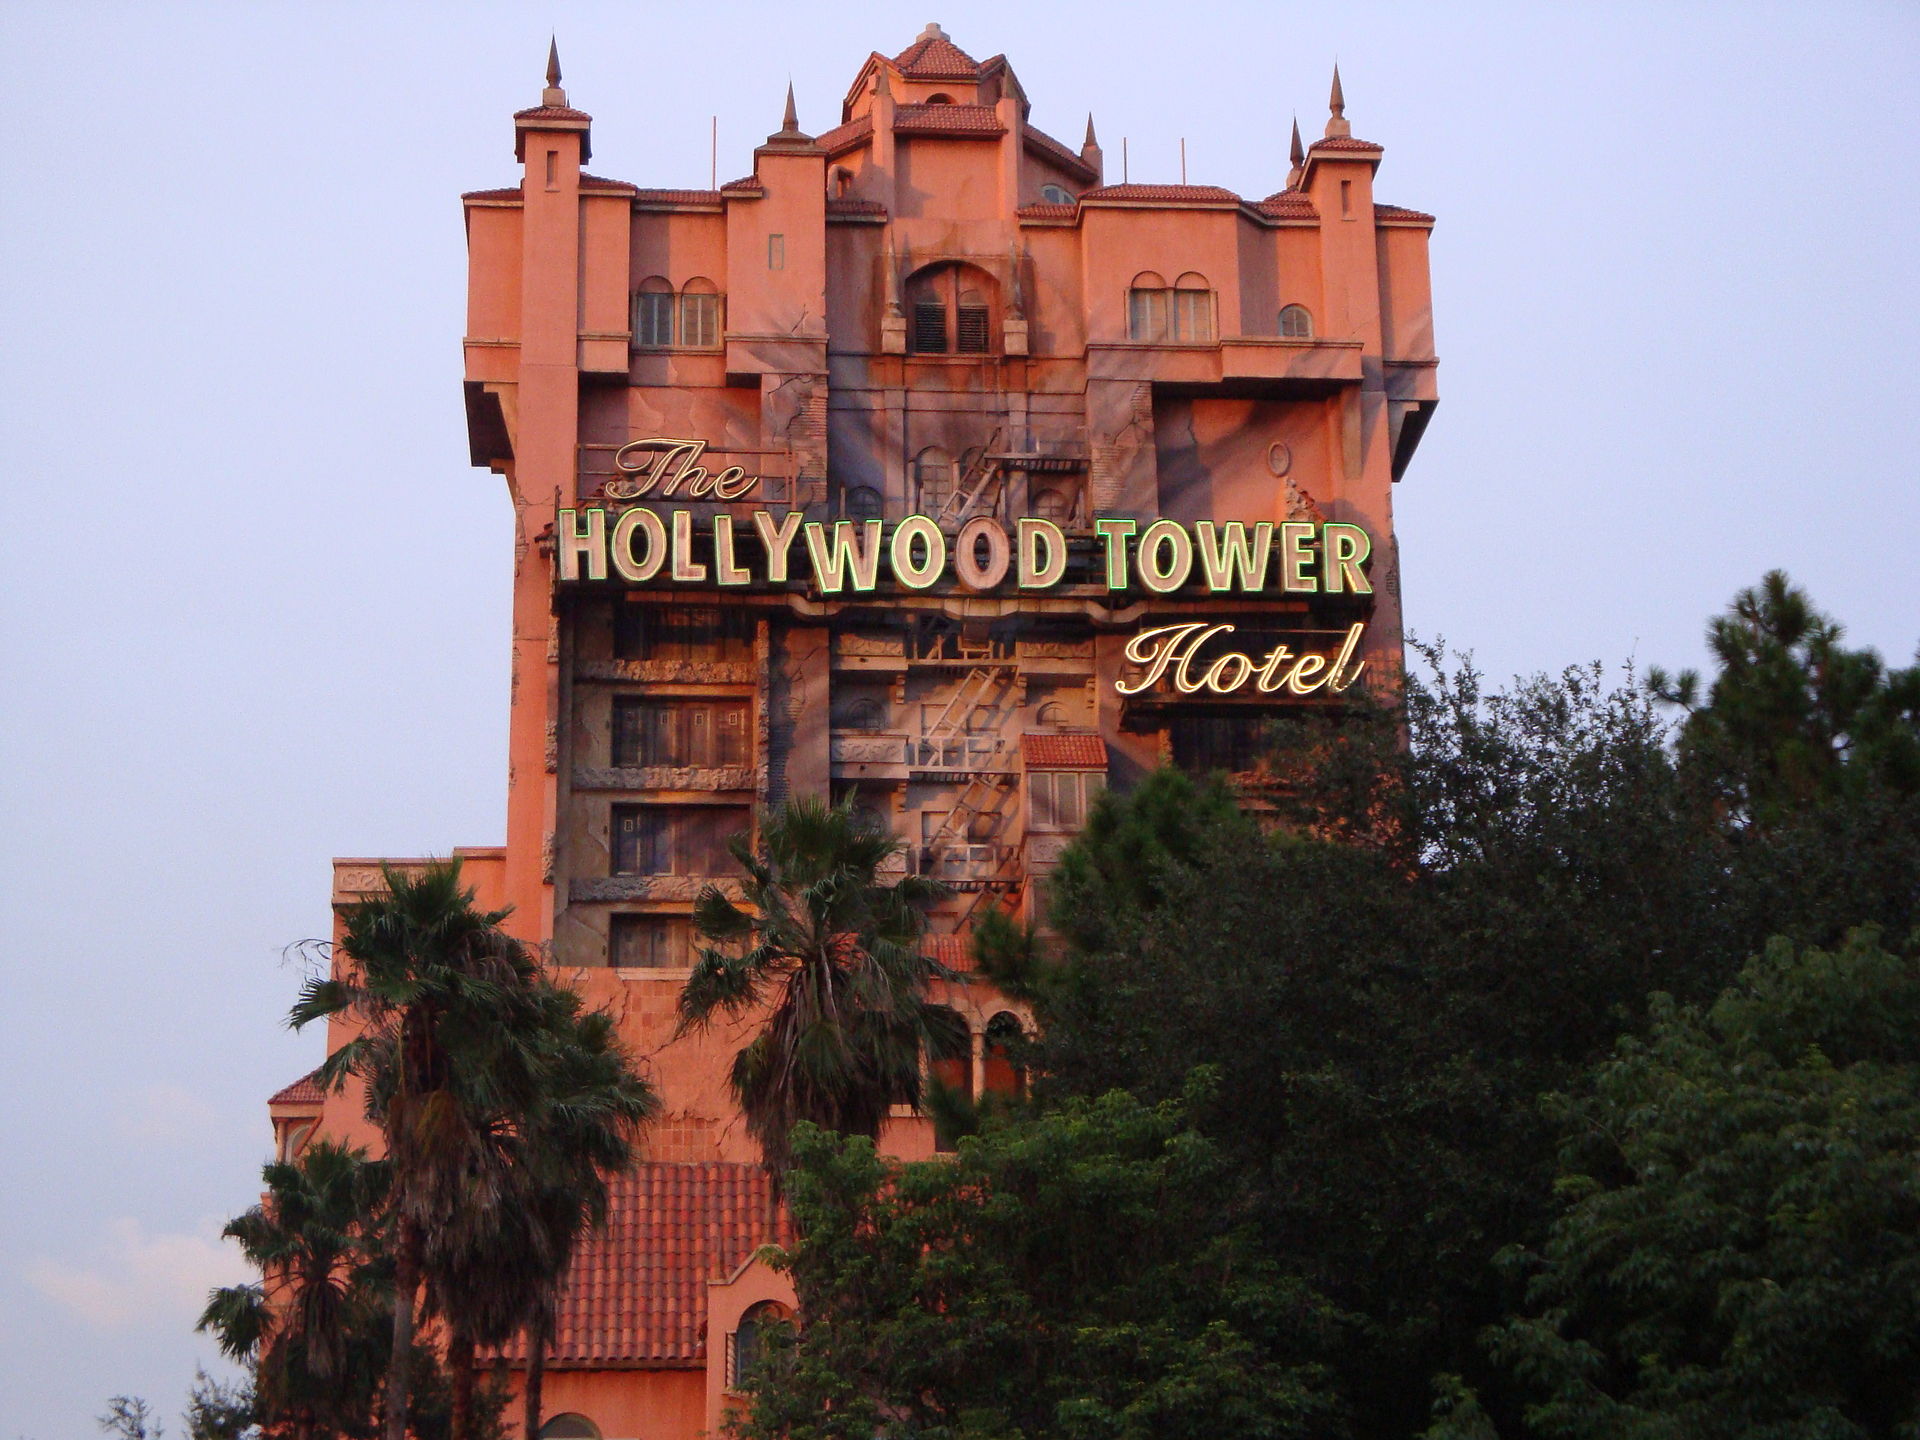 The Hollywood Tower Hotel Limited Release MagicBand is coming soon